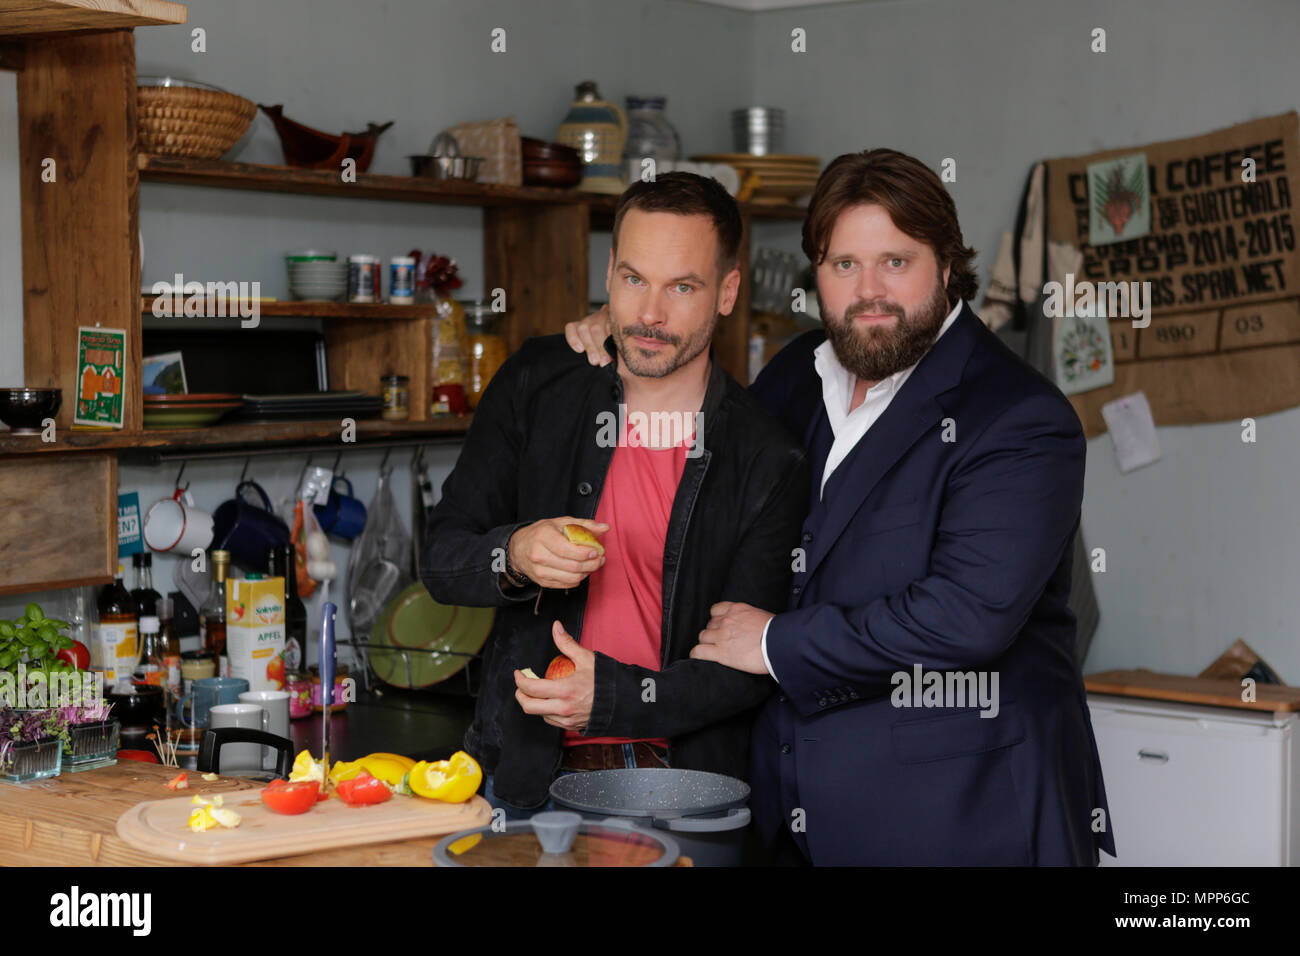 Frankfurt, Germany. 24th May 2018. Actors Wanja Mues (left) an (Antoine Monot, Jr. (right) pose in the kitchen of  the houseboat that is owned by Mues' character Leo in the TV show preparing food. 4 new episodes of the relaunch of the long running TV series 'Ein Fall fuer zwei’ (A case for two) are being filmed in Frankfurt for the German state TV broadcaster ZDF (Zweites Deutsches Fernsehen). It stars Antoine Monot, Jr. as defence attorney Benjamin ‘Benni’ Hornberg and Wanja Mues as private investigator Leo Oswald. The episodes are directed by Thomas Nennstiel. The episodes are set to air in  Stock Photo